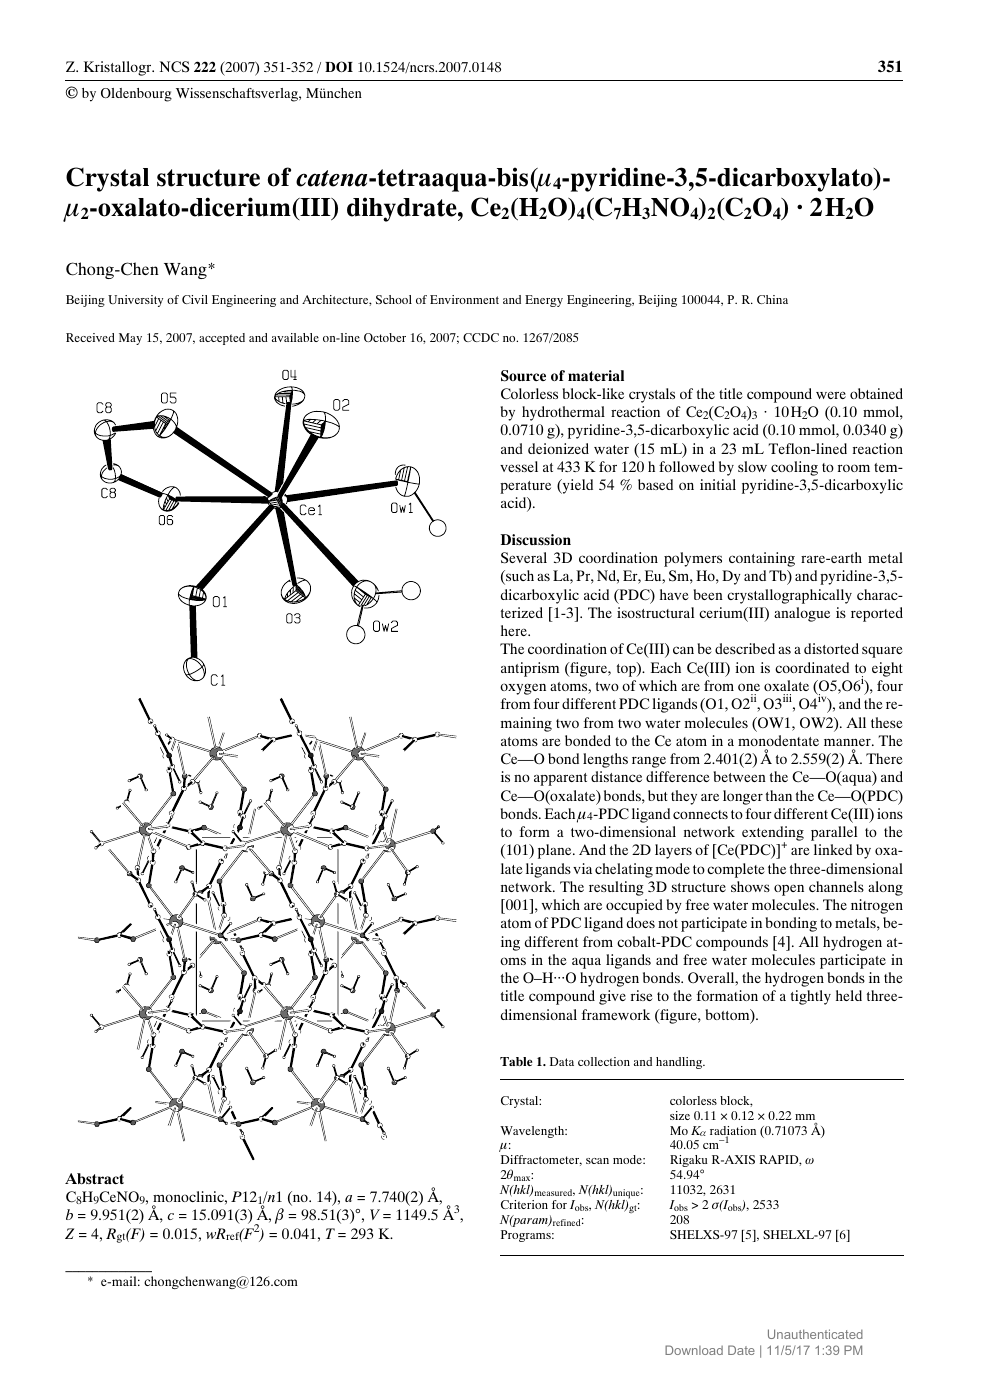 Crystal Structure Of Catena Tetraaqua Bis M4 Pyridine 3 5 Dicarboxylato M2 Oxalato Dicerium Iii Dihydrate Ce2 H2o 4 C7h3no4 2 C2o4 2h2o Topic Of Research Paper In Chemical Engineering Download Scholarly Article Pdf And Read For Free On